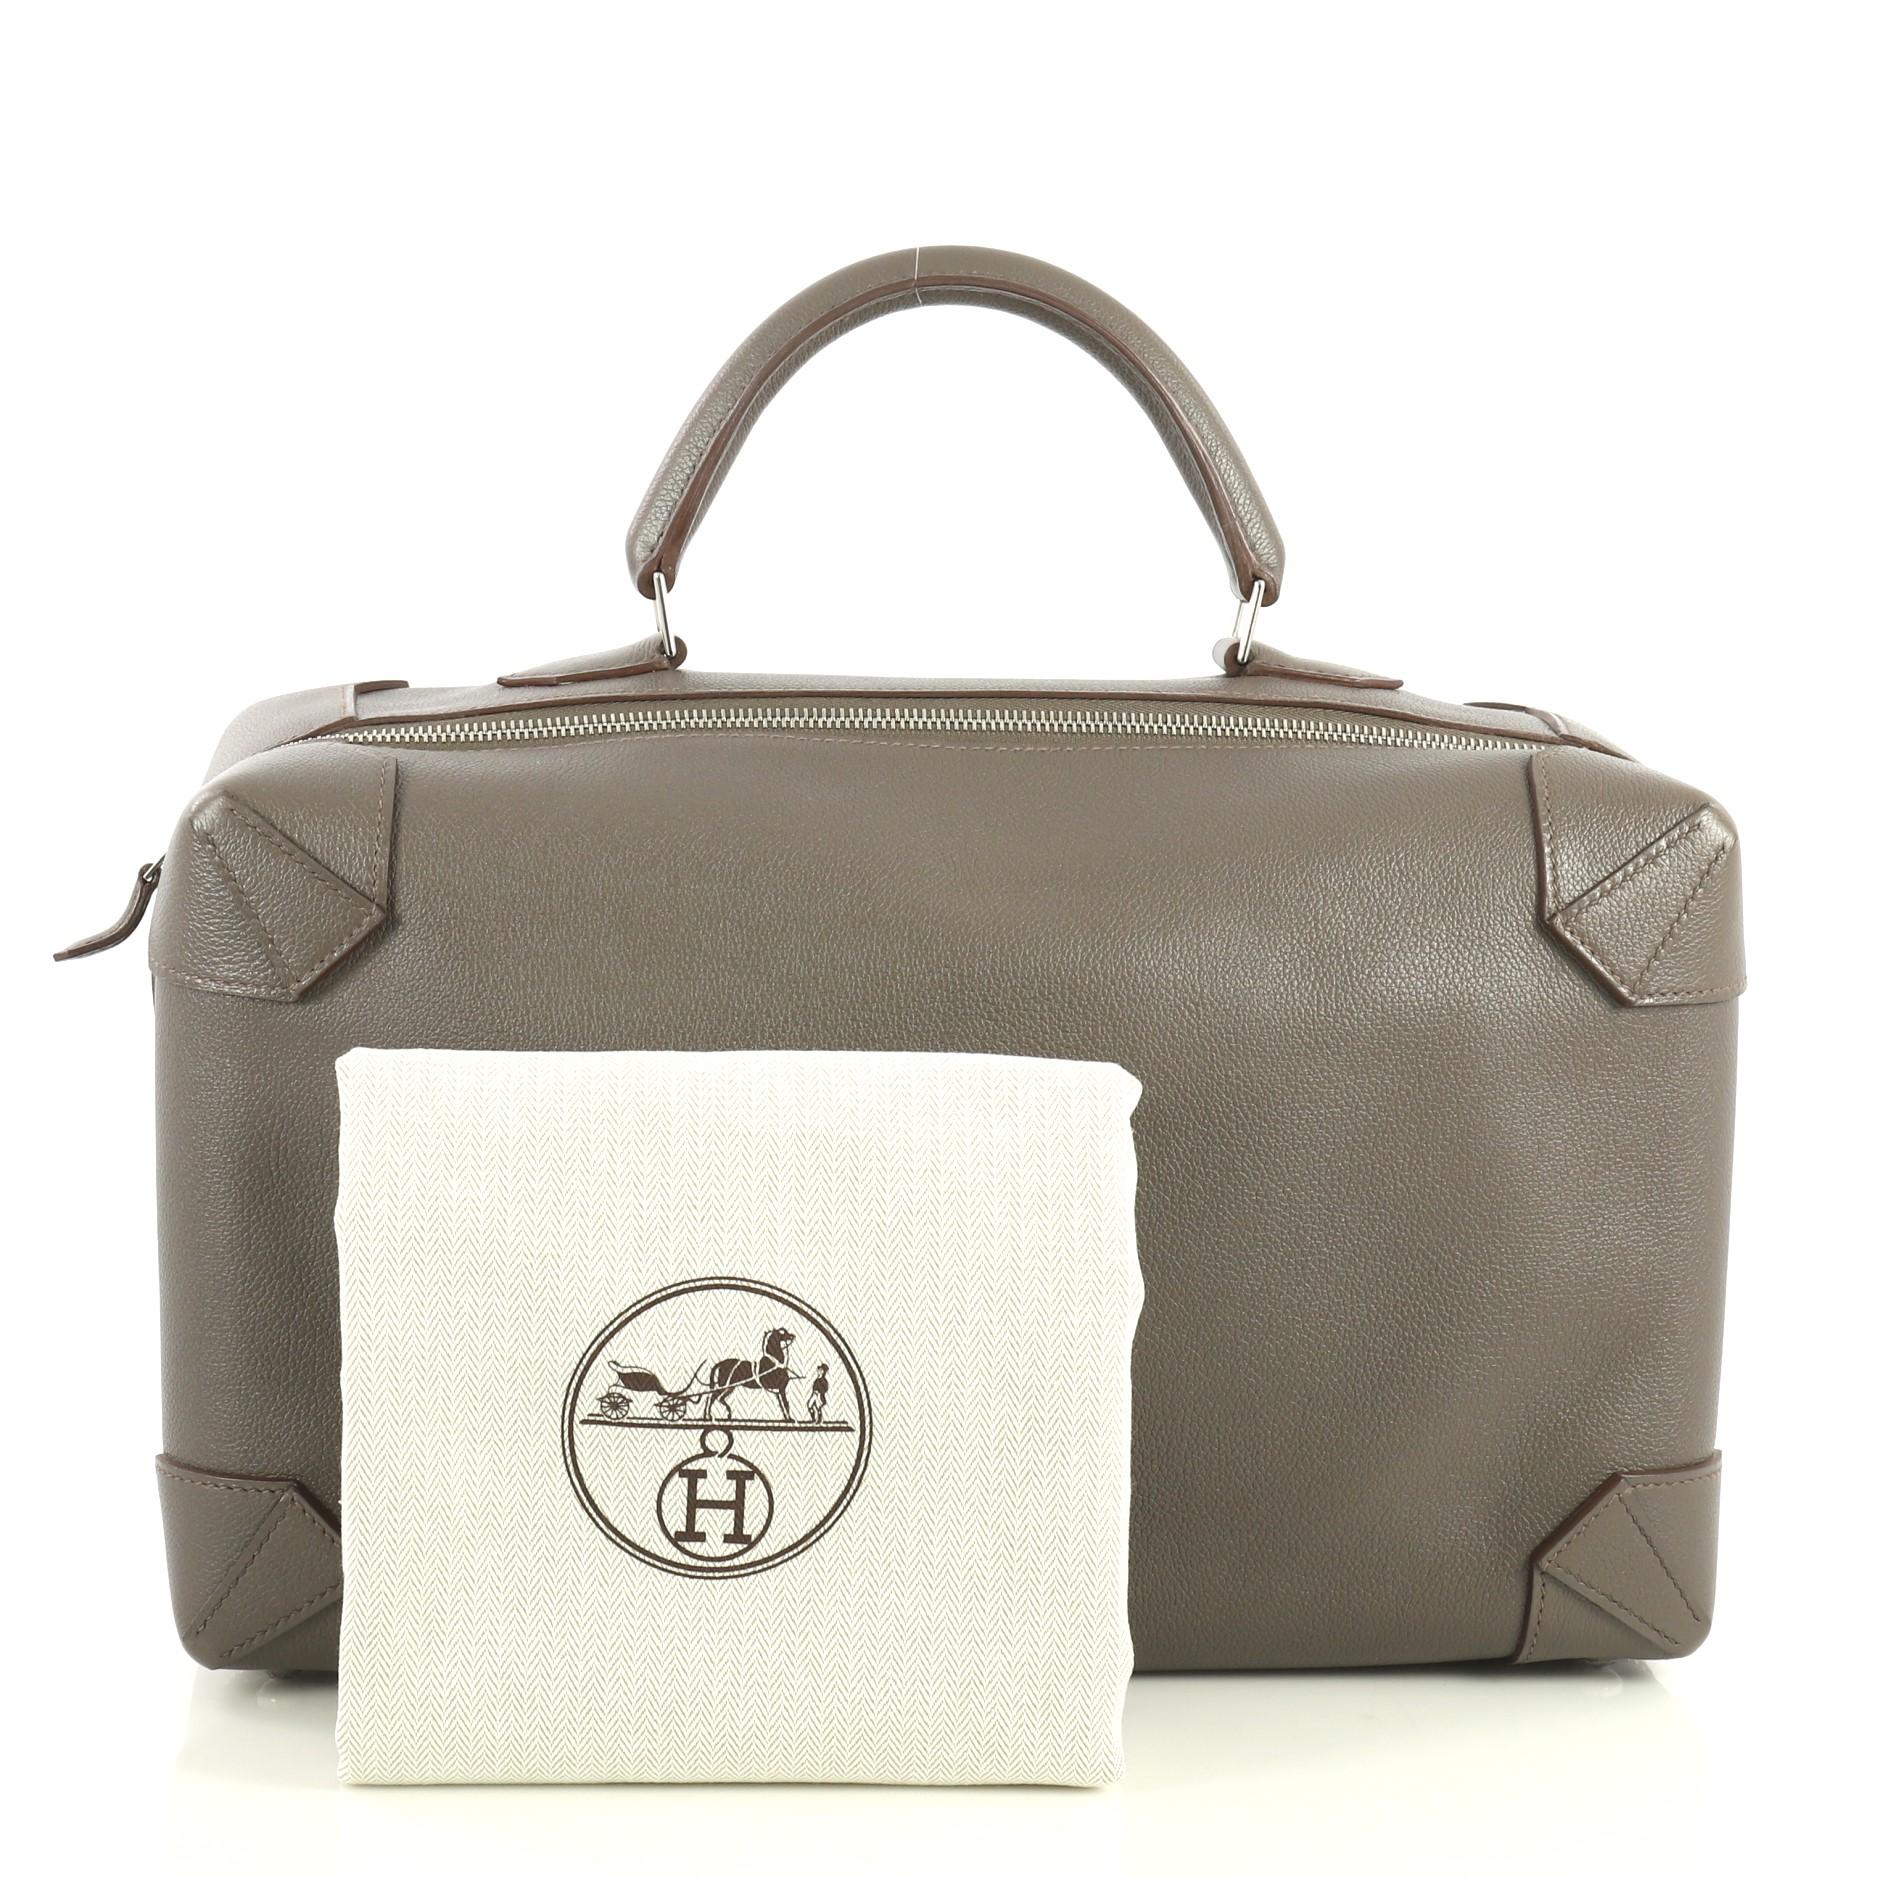 This Hermes Maxibox Handbag Evercolor 37, crafted in Etain neutral Evercolor leather, features a rolled leather handle and palladium hardware. Its zip closure opens to an Etain neutral Chevre leather interior with zip and slip pockets. Date stamp